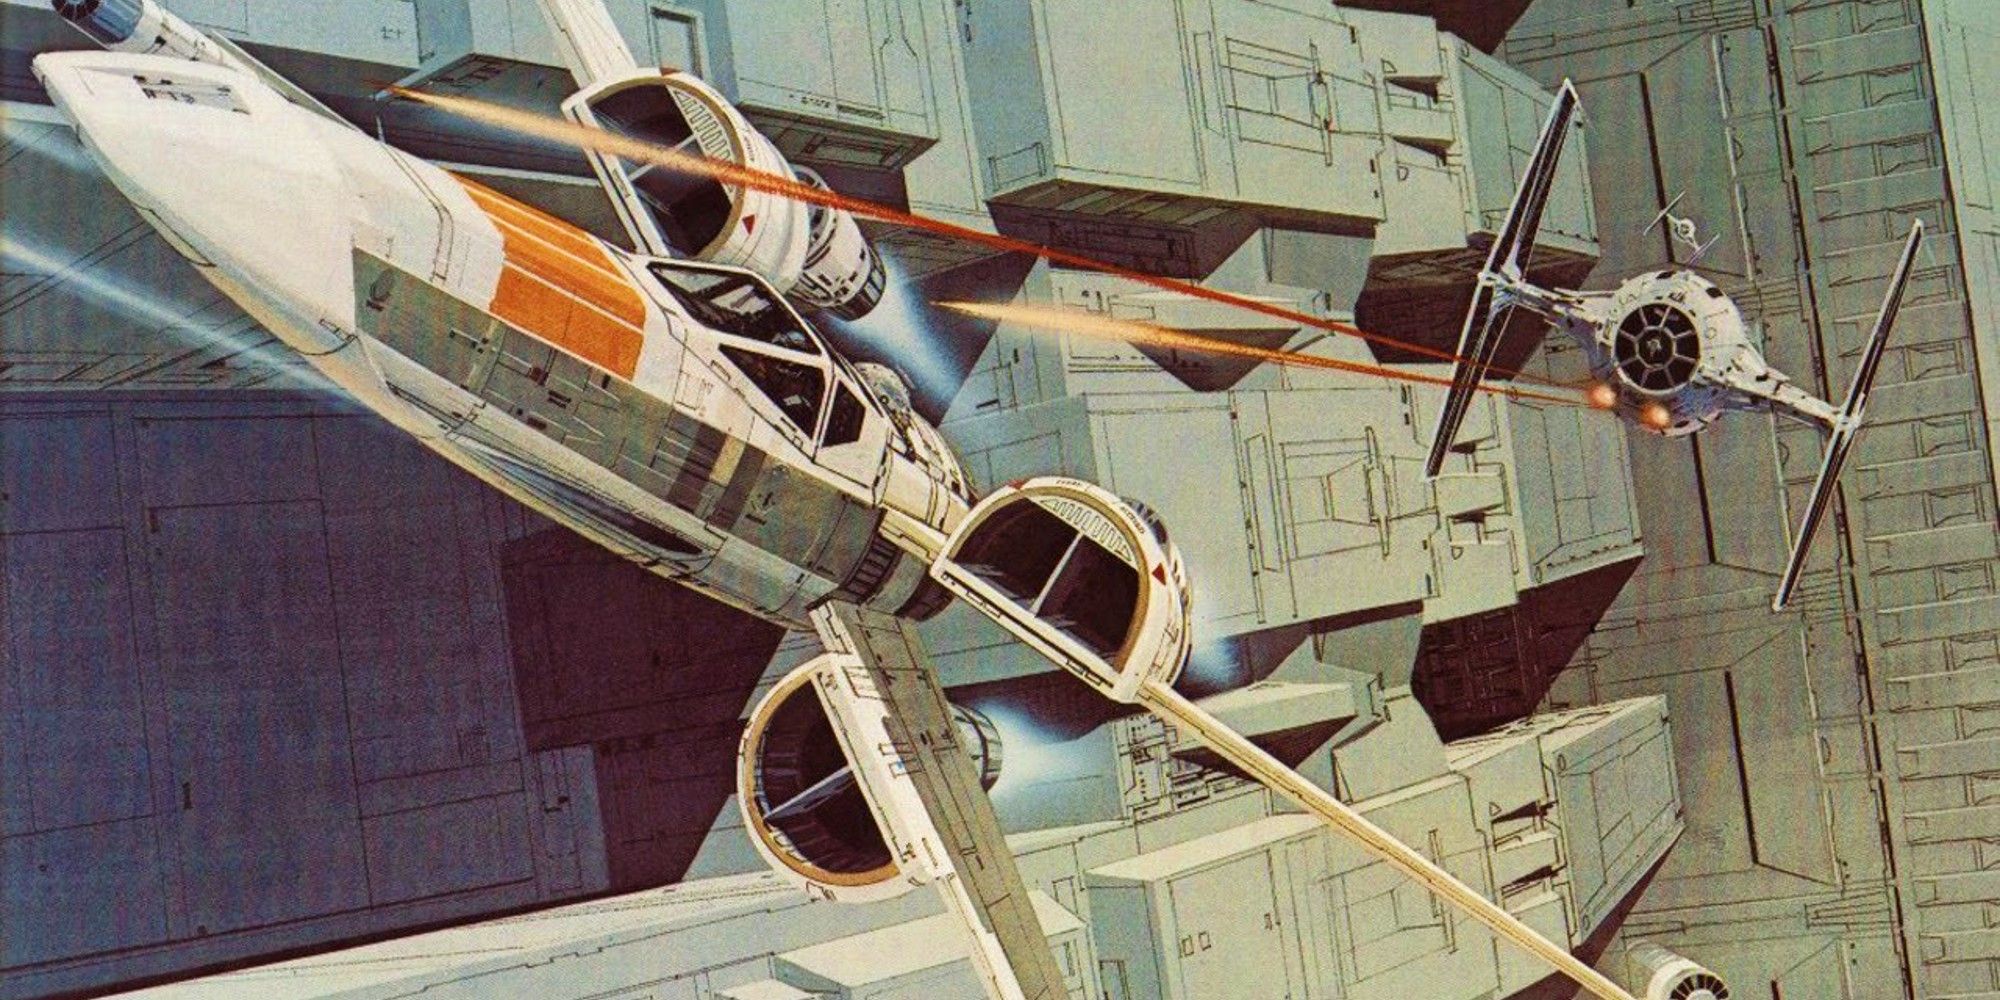 Original McQuarrie art of a X-Wing and TIE Fighter from Star Wars